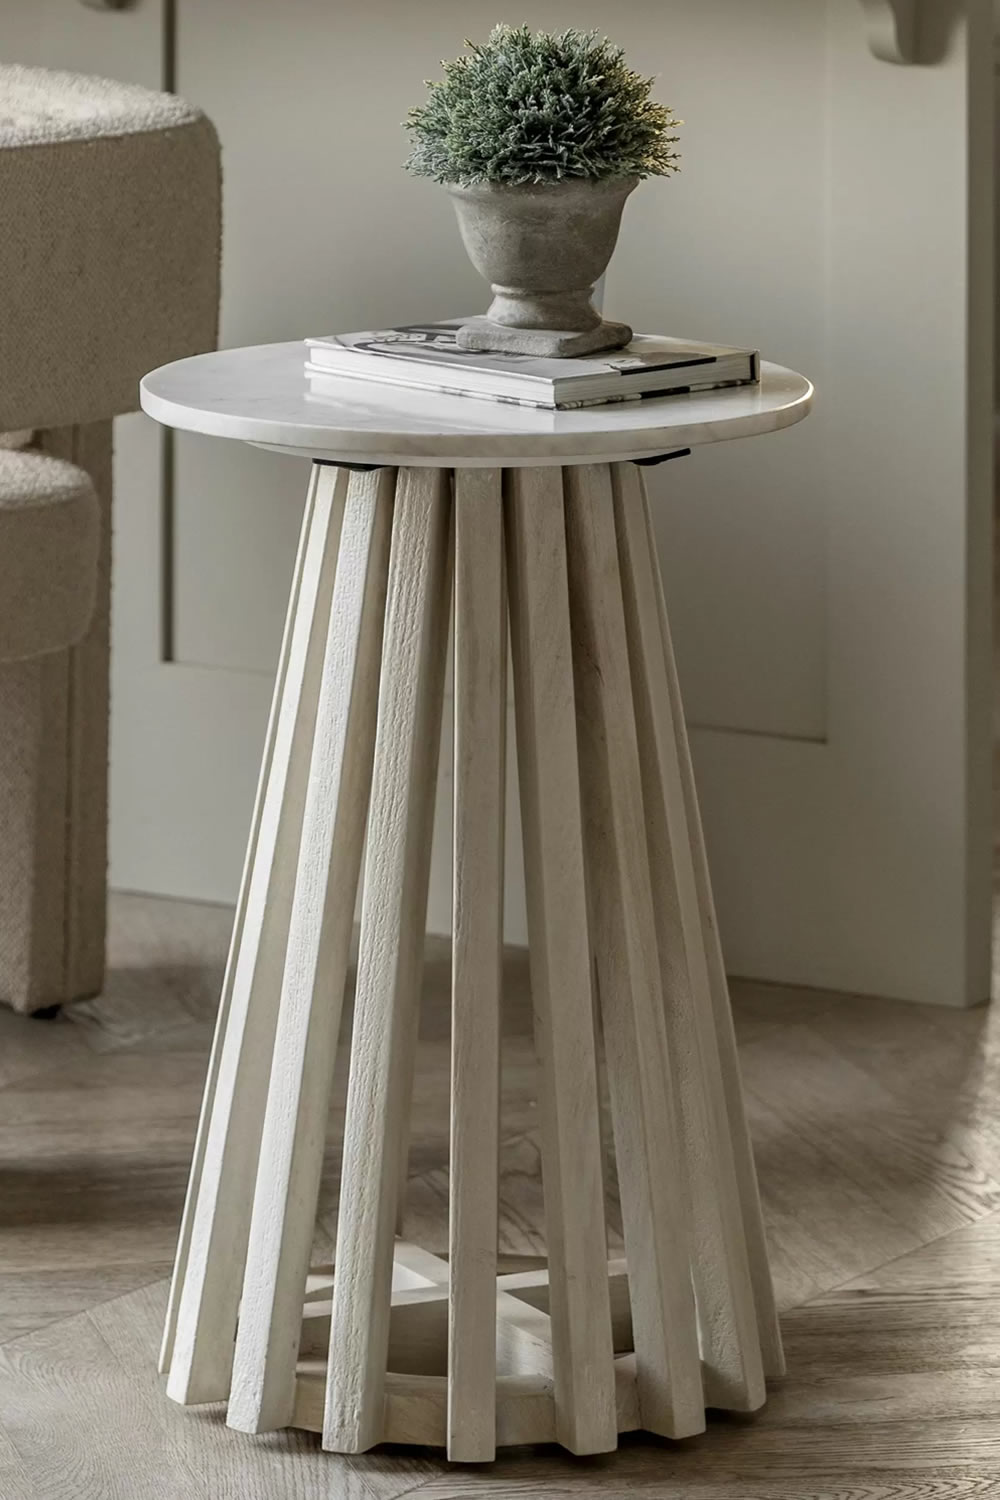 View Soho Side Table Solid Natural Mango Wood Chic Design White Indian Marble Top Easy Assembly Matching Pieces Available information